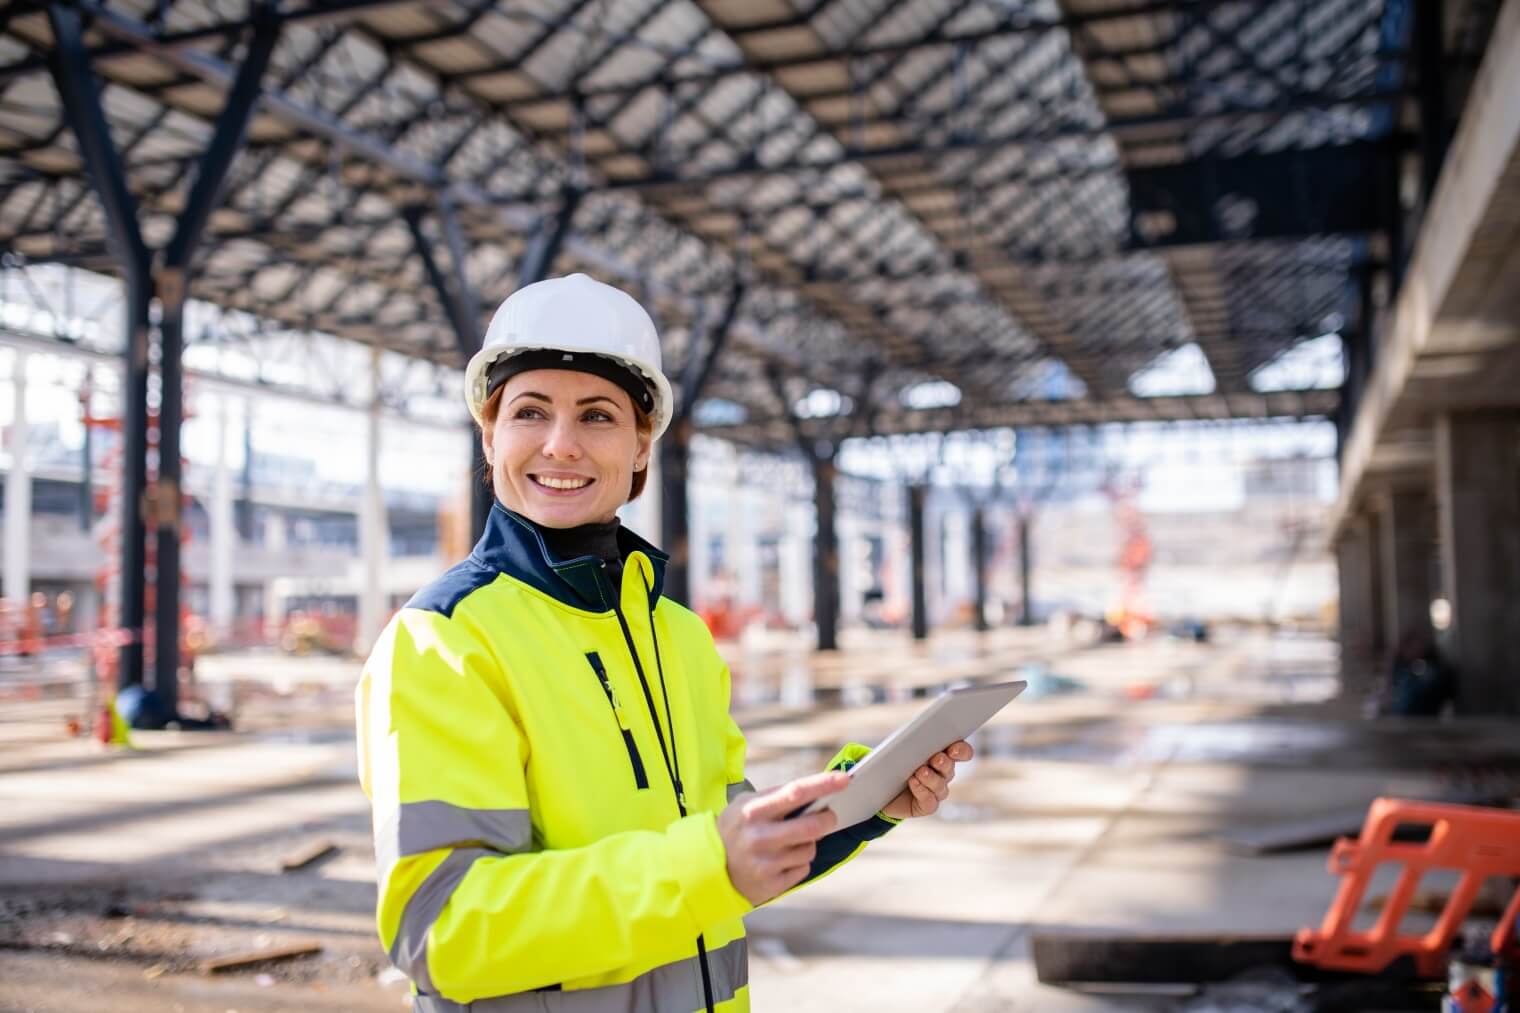 a woman wearing  a high-vis jacket and white safety helmet holds a tablet and is smiling on a construction site